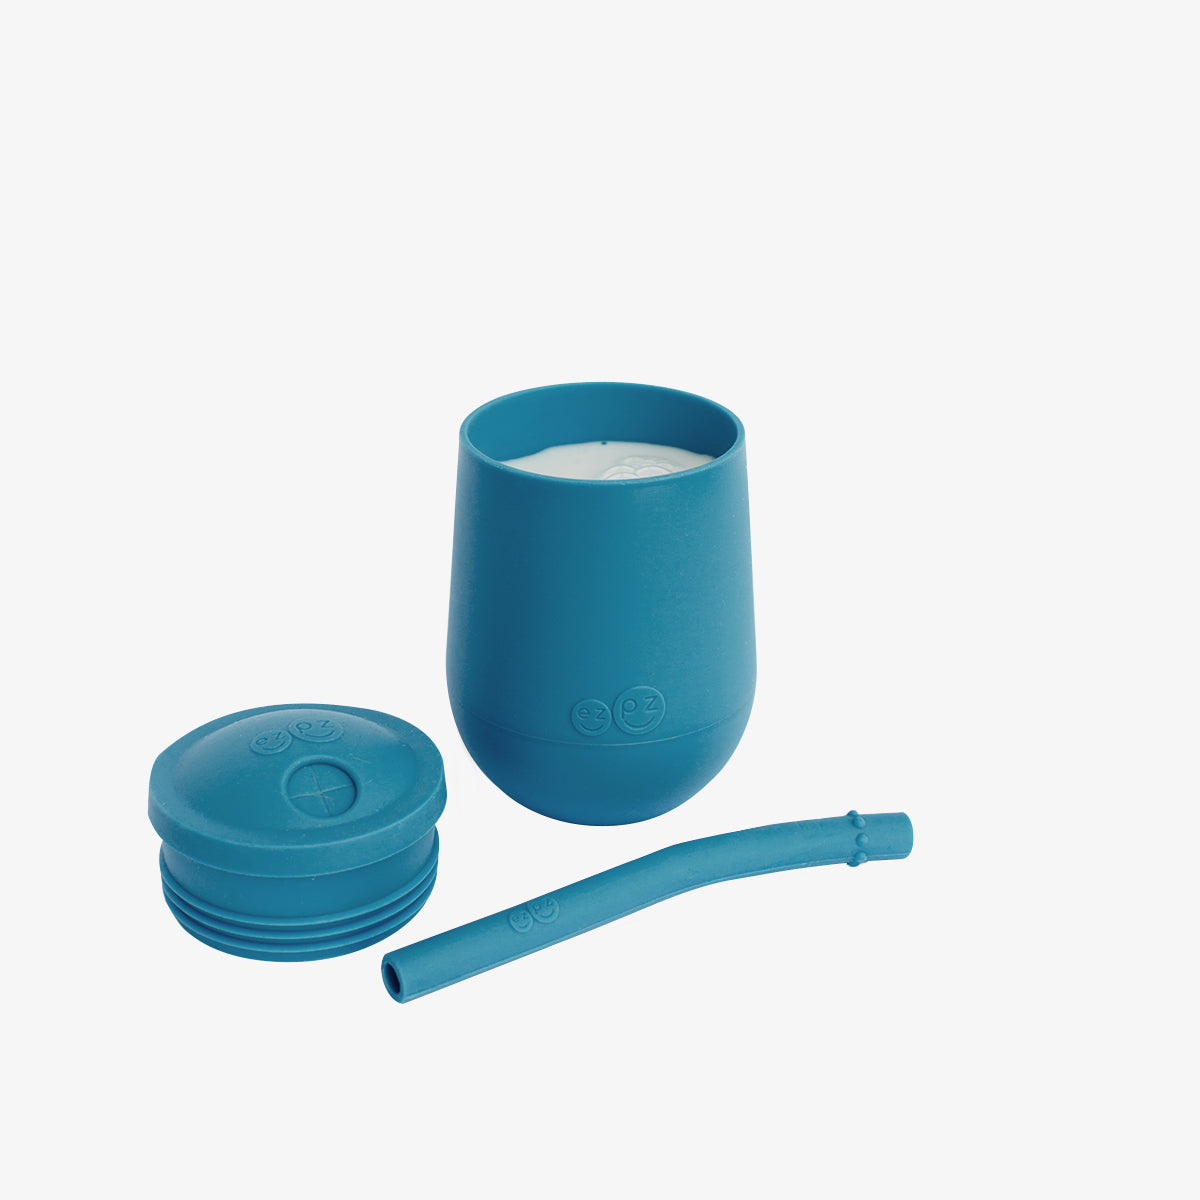 The Mini Cup + Straw in Blue by ezpz / Silicone Drinking Cup and Straw Training System for Toddlers